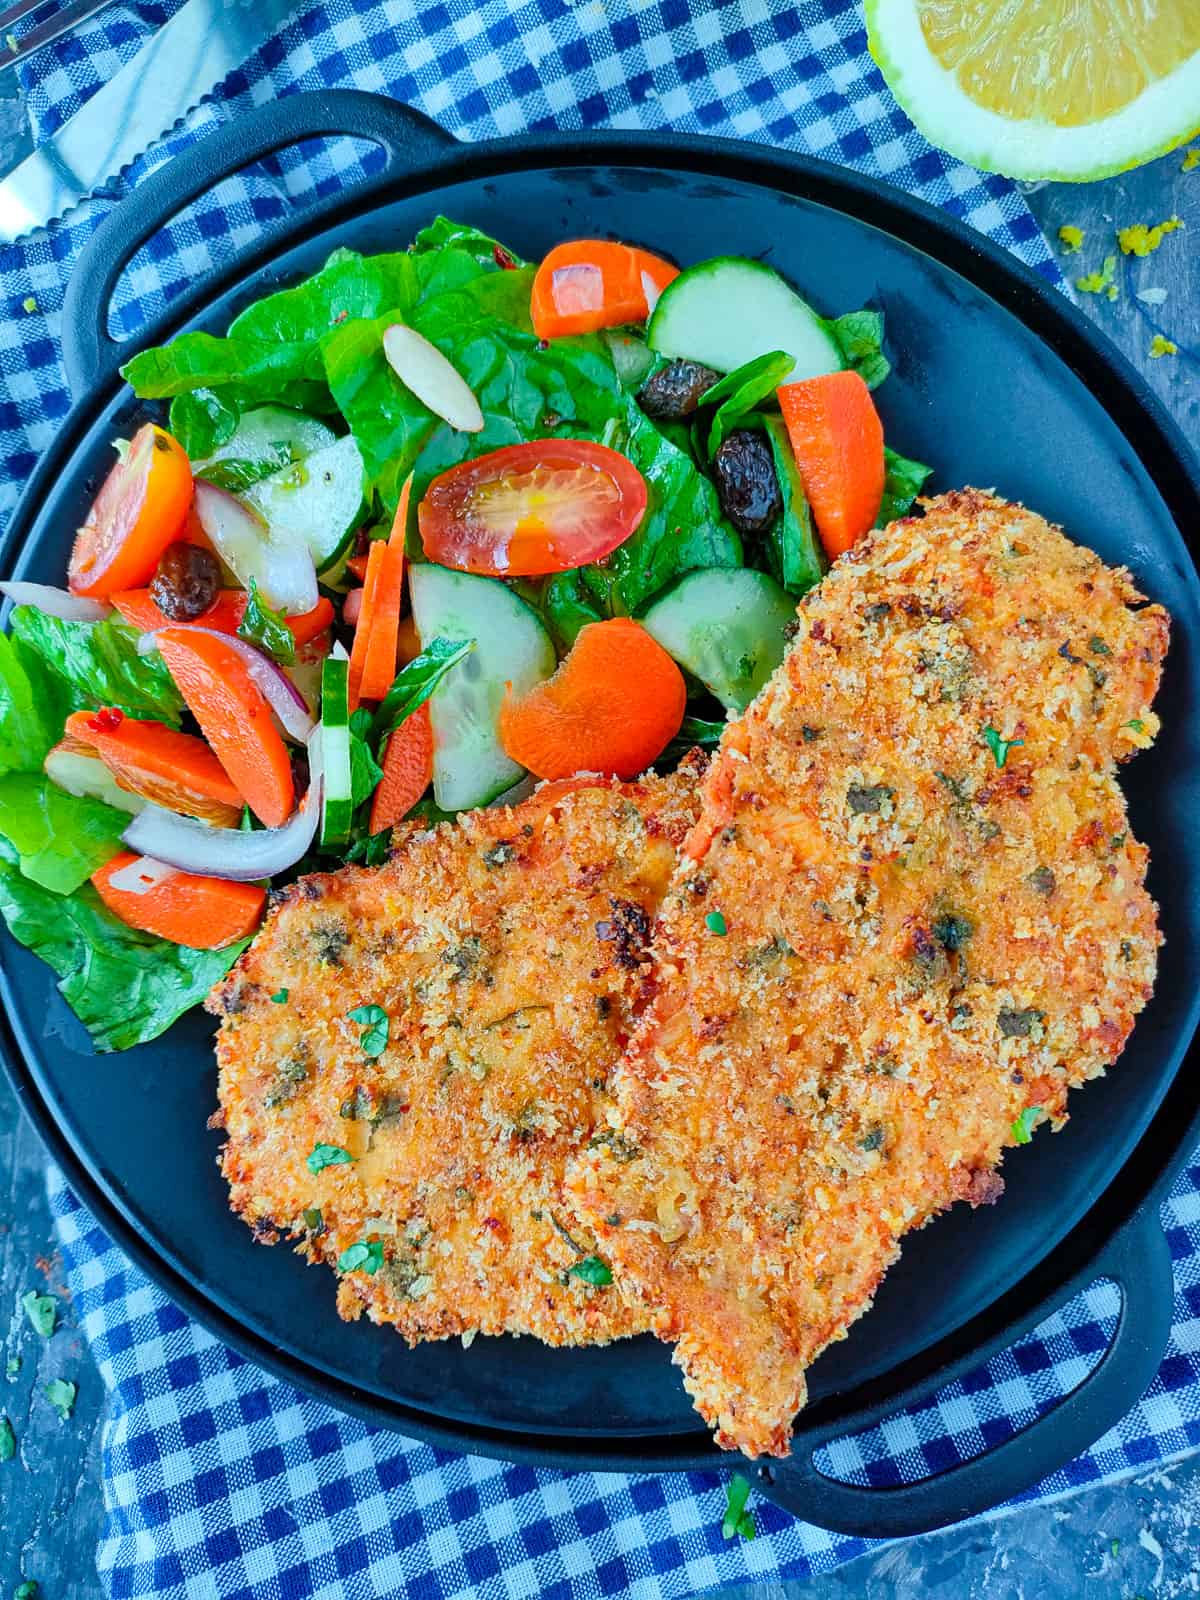 Crispy panko crusted chicken breasts with vegetable salad on a black plate.